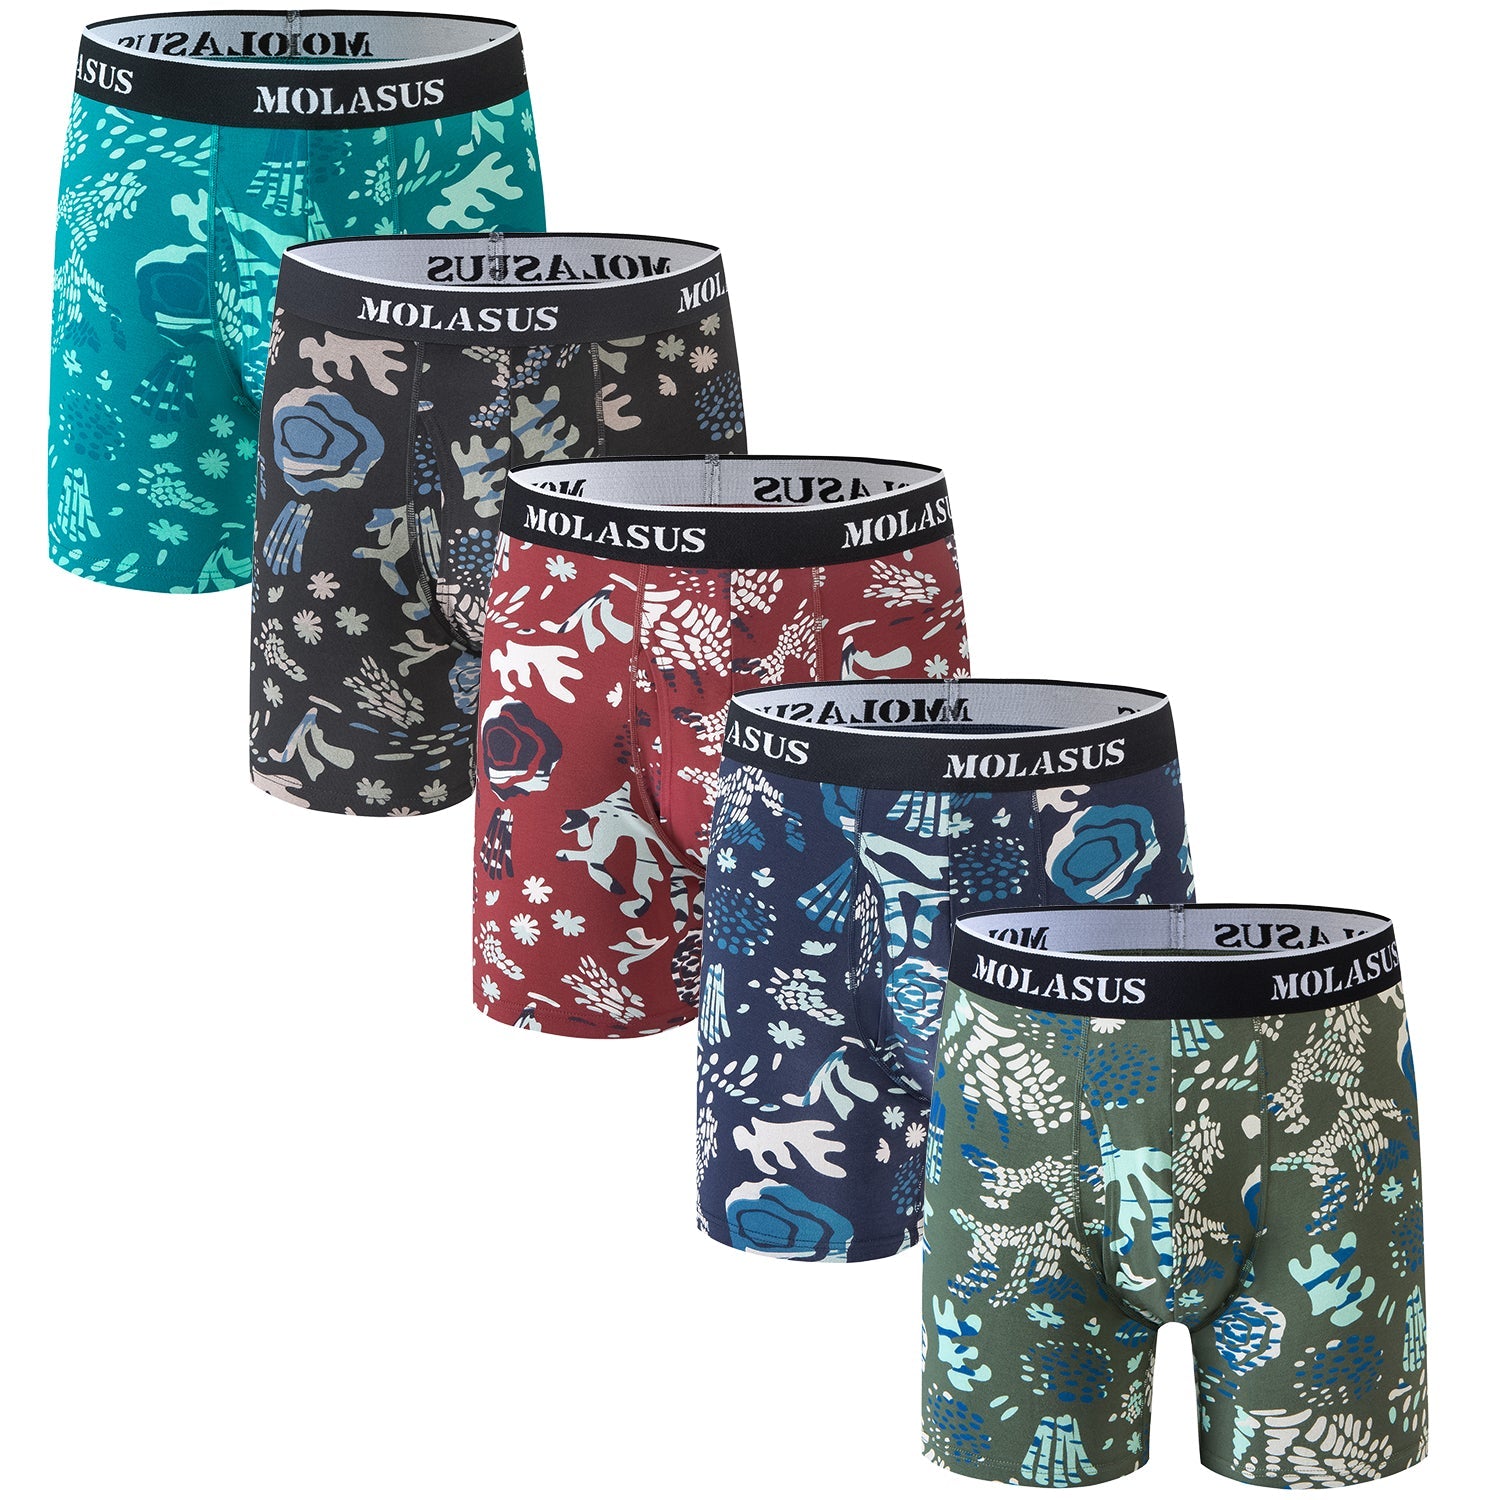 Molasus Mens Boxer Briefs Soft Cotton Underwear Open Fly Tagless Underpants  Pack of 5 Multicolor1